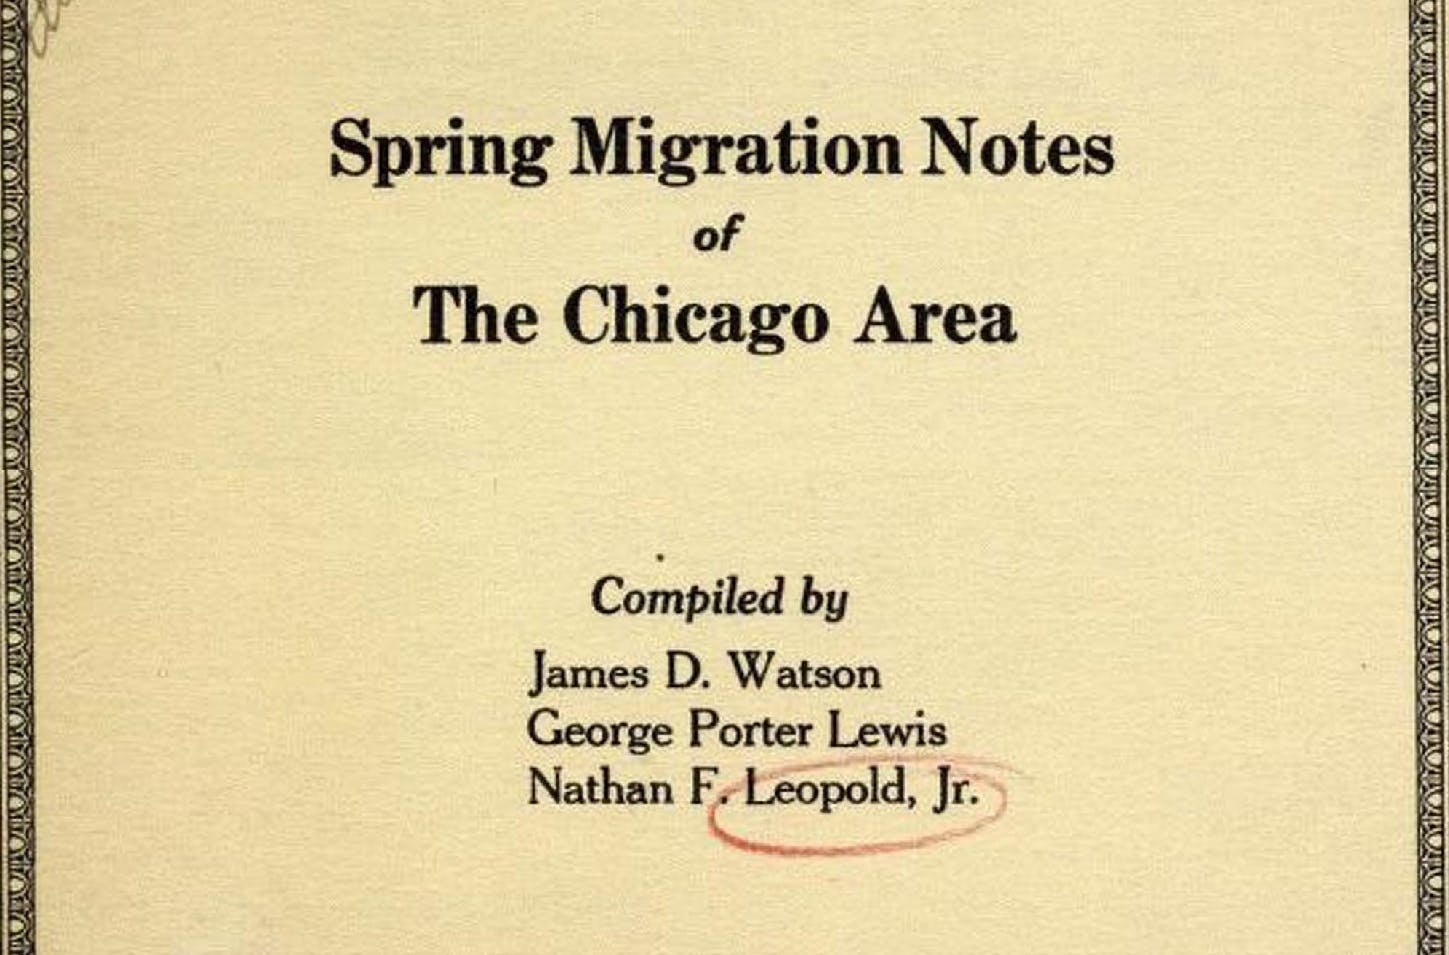 Image for History and birds come together: Spring Migration Notes from 1920 and its famous authors